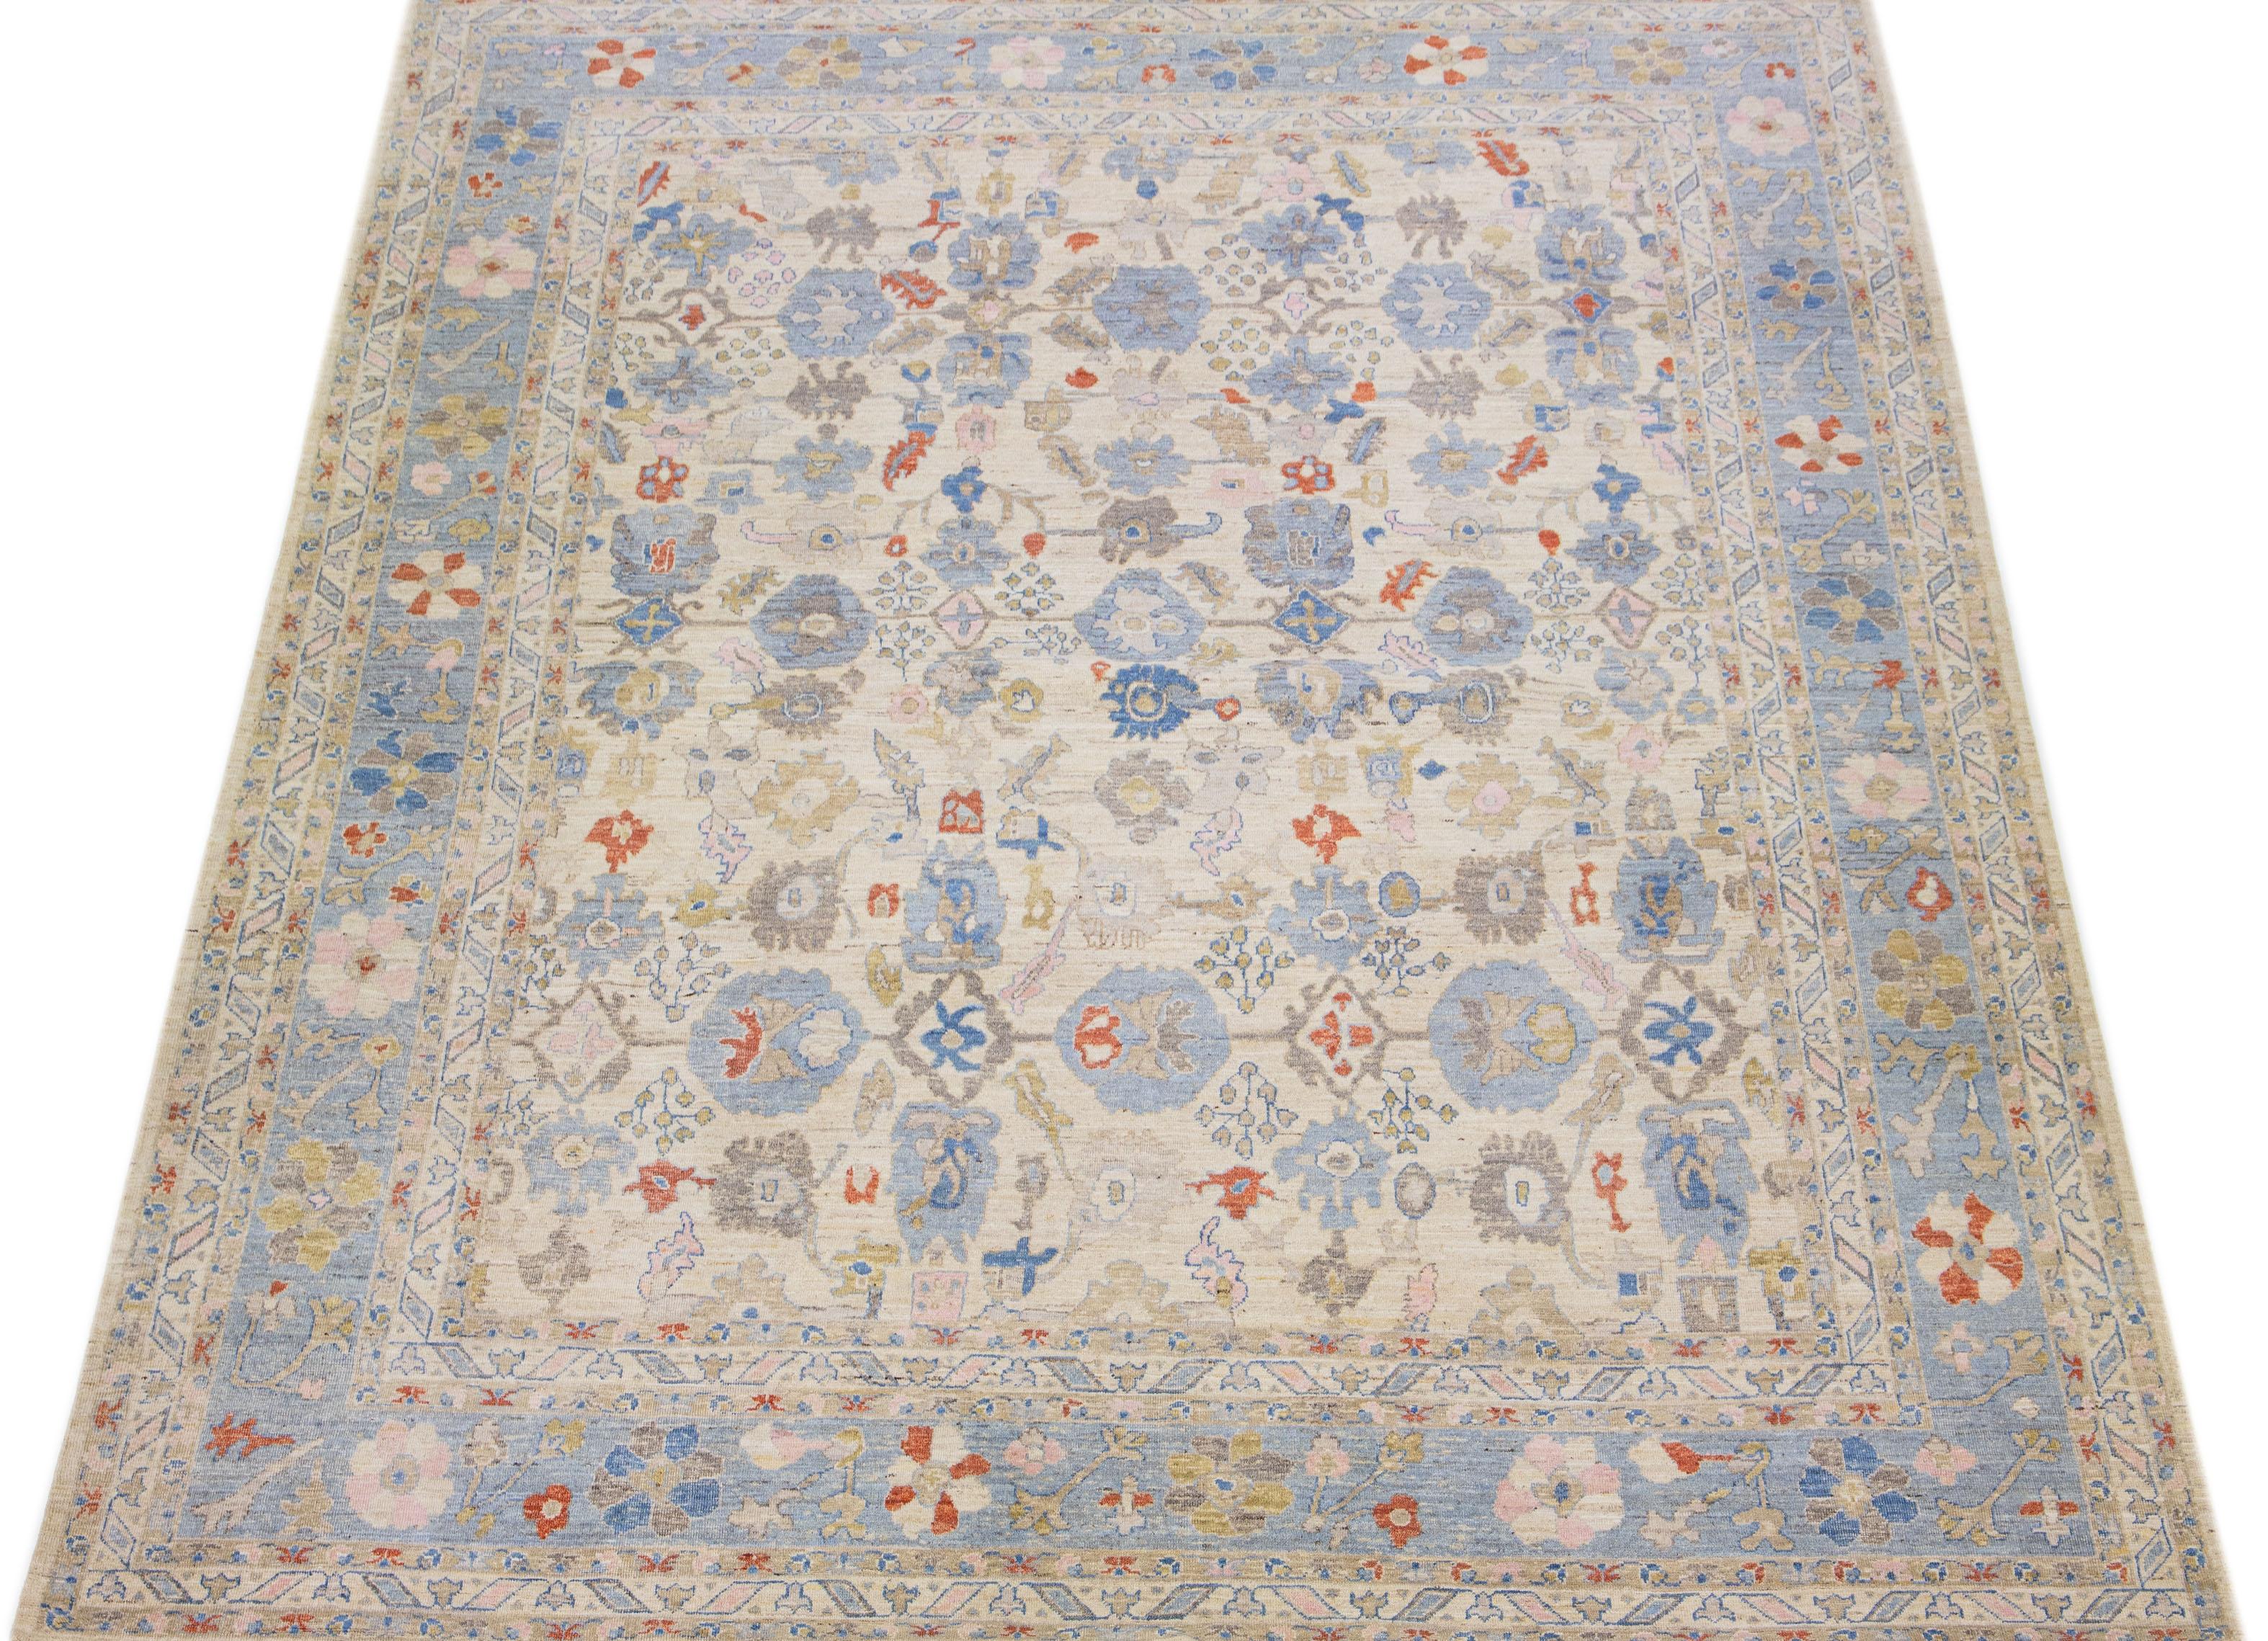 This hand-knotted wool rug showcases an exquisite modern Oversize Sultanabad design in a stunning beige color palette. Its intricate blue frame features captivating accents in rust, blue, and pink hues arranged in a remarkable all-over